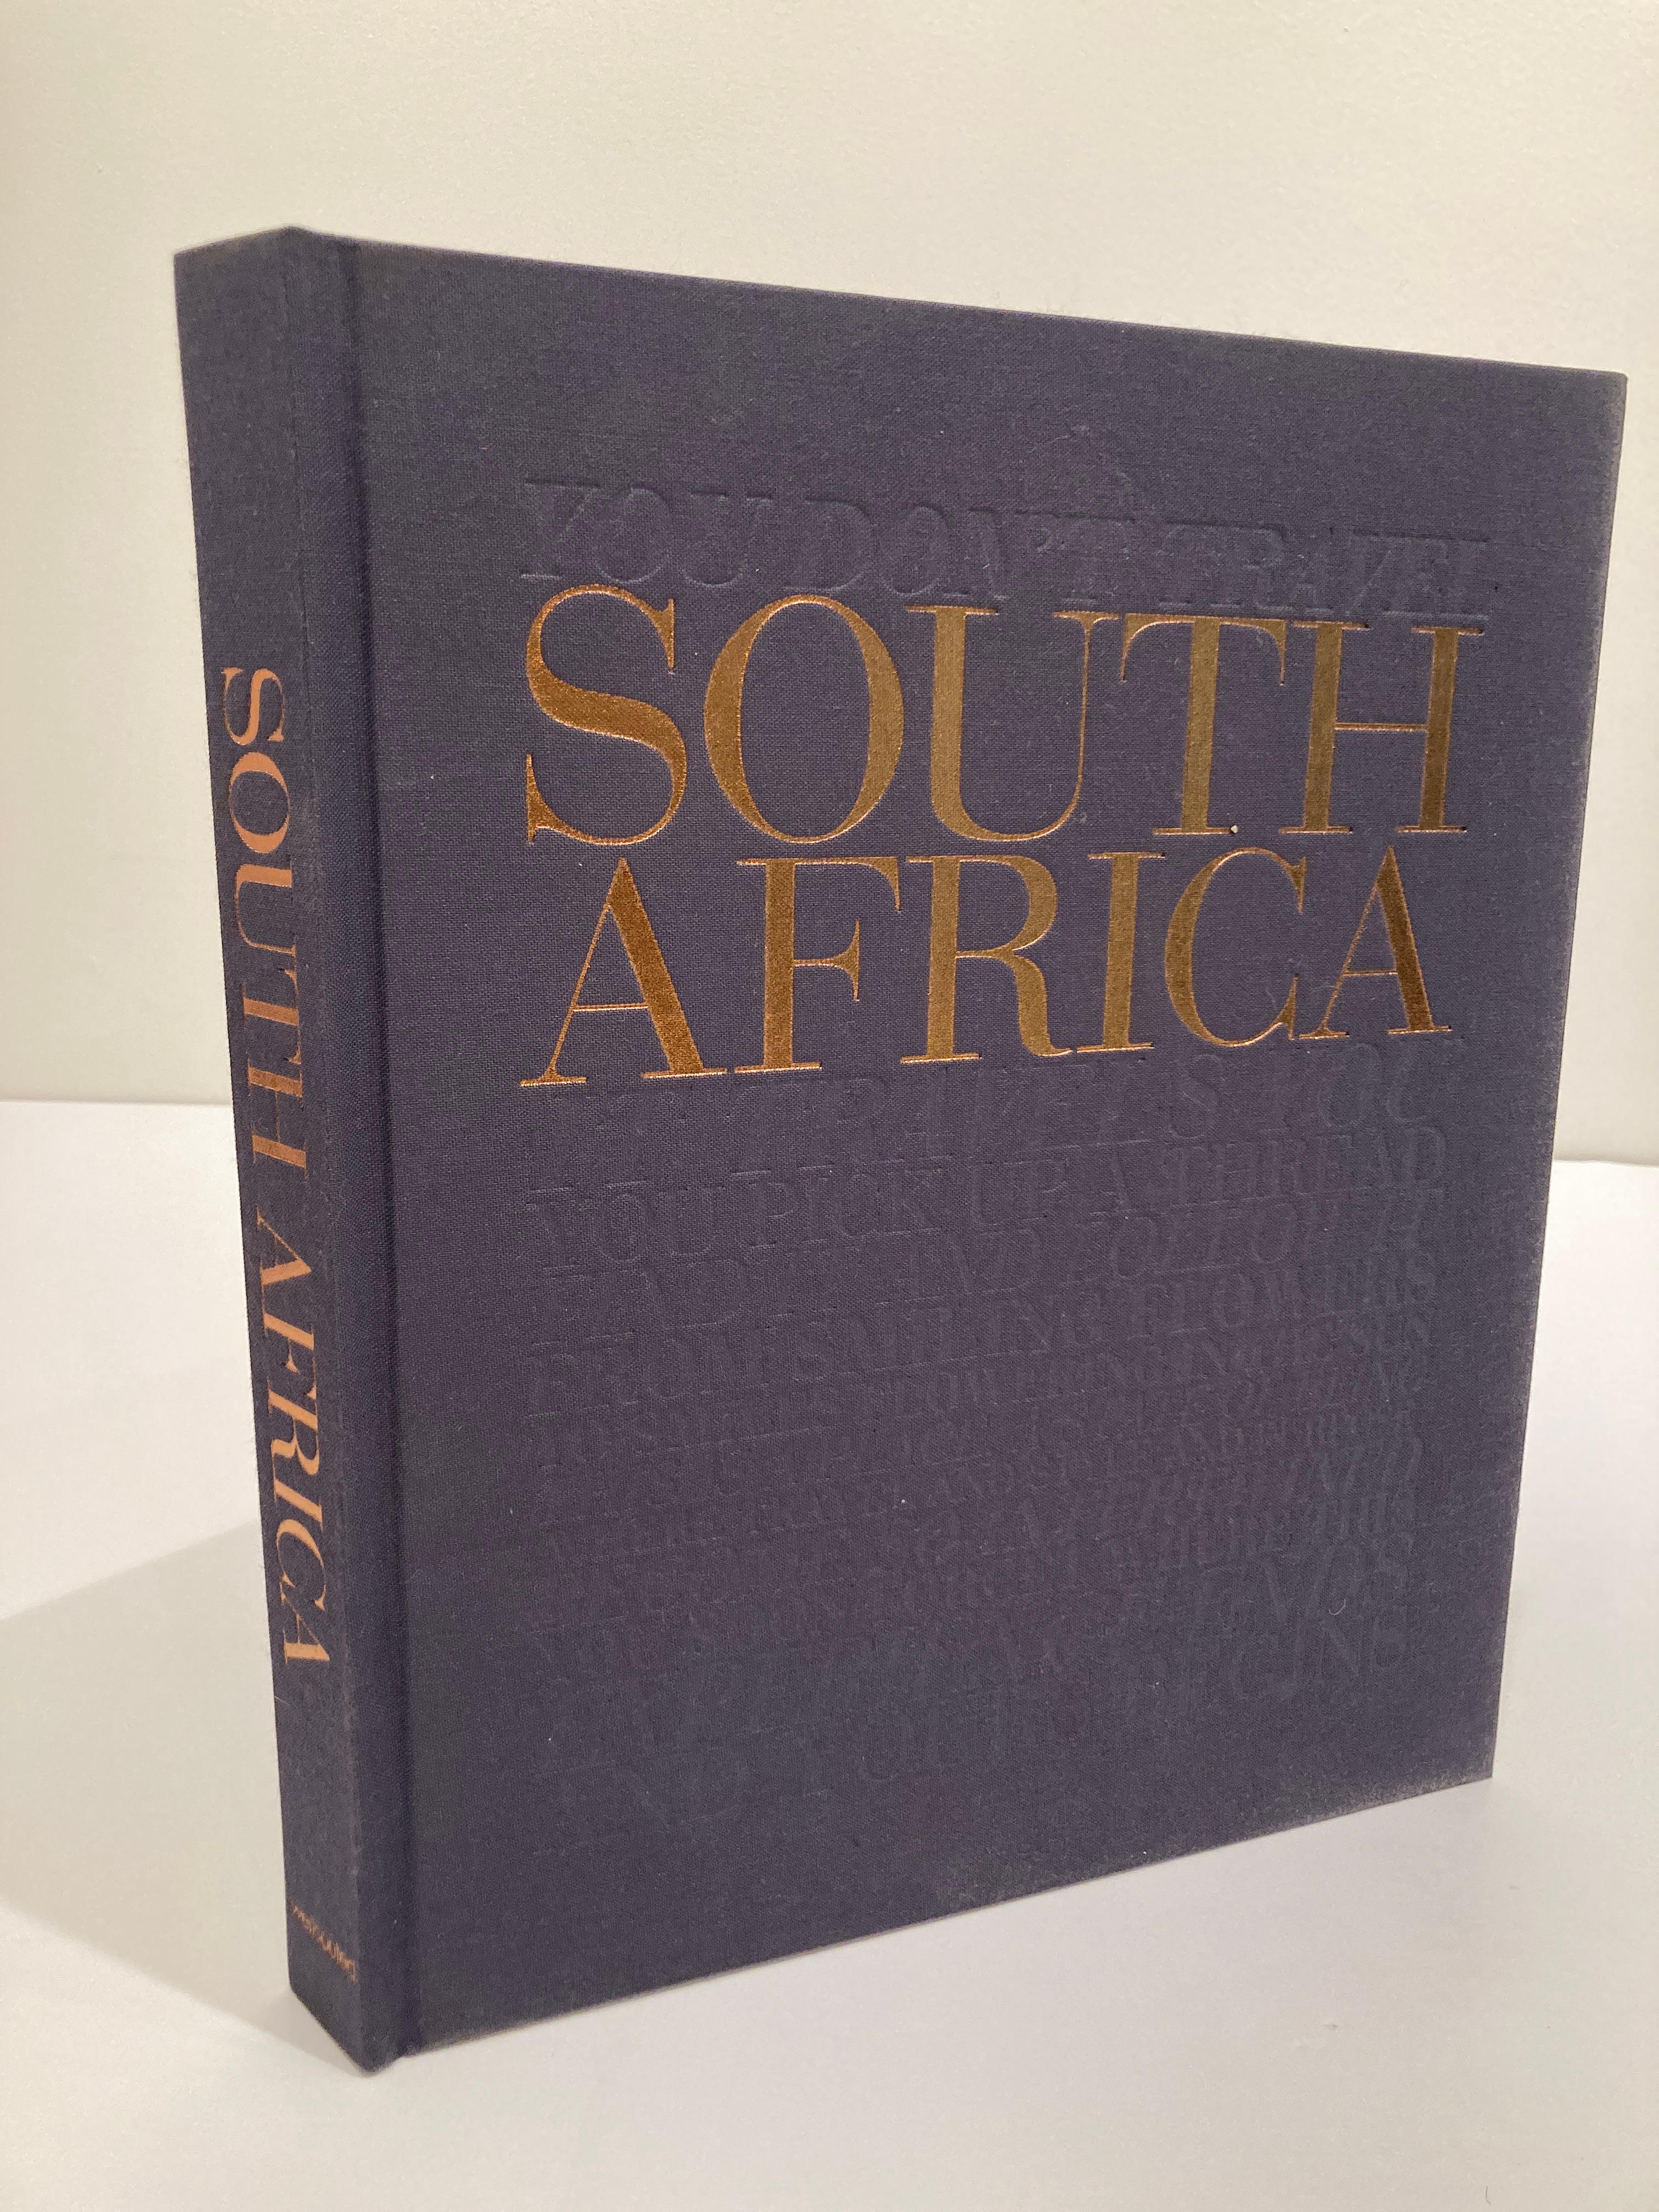 South Africa by Shah, Mital; Photography by Mark Leibowitz and Gerald Forster.
Mital Shah and publisher Well Souled put the beauty of South Africa in a luxe linen-bound monograph.
Well Souled South Africa is a 314-page, hardbound book placed in a